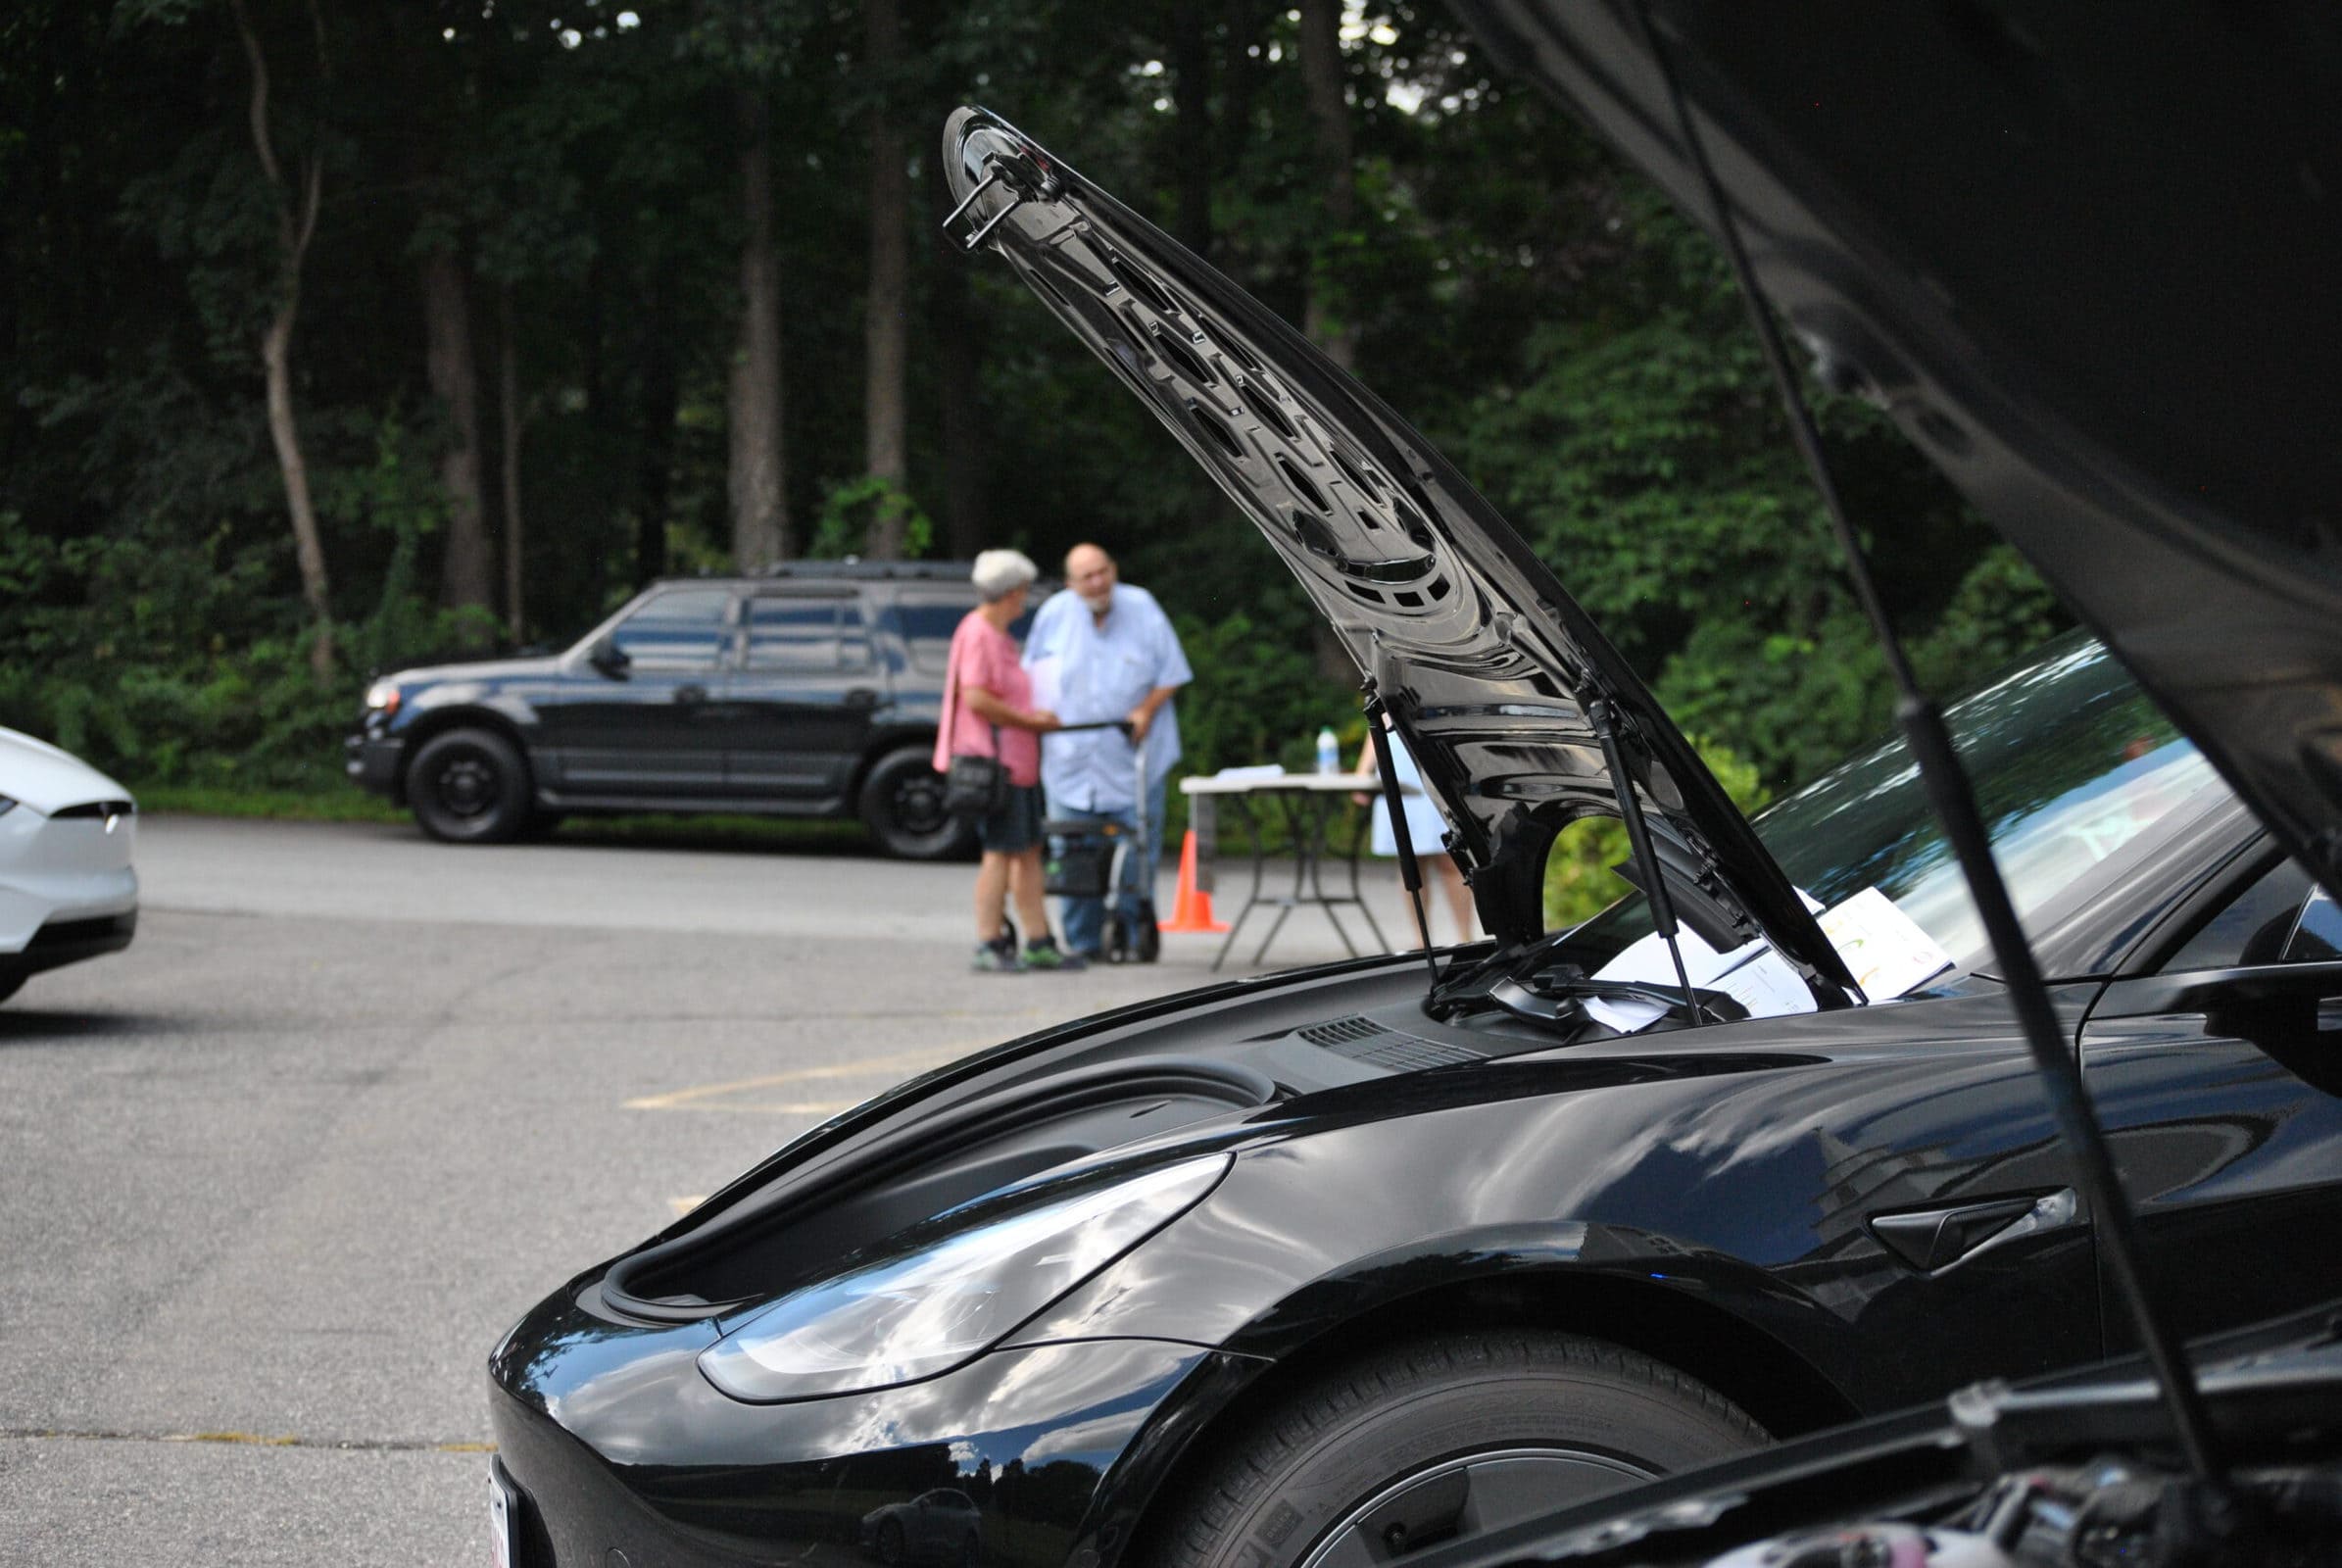 Rotary Club, Sustainable Westborough host electric vehicle informational event